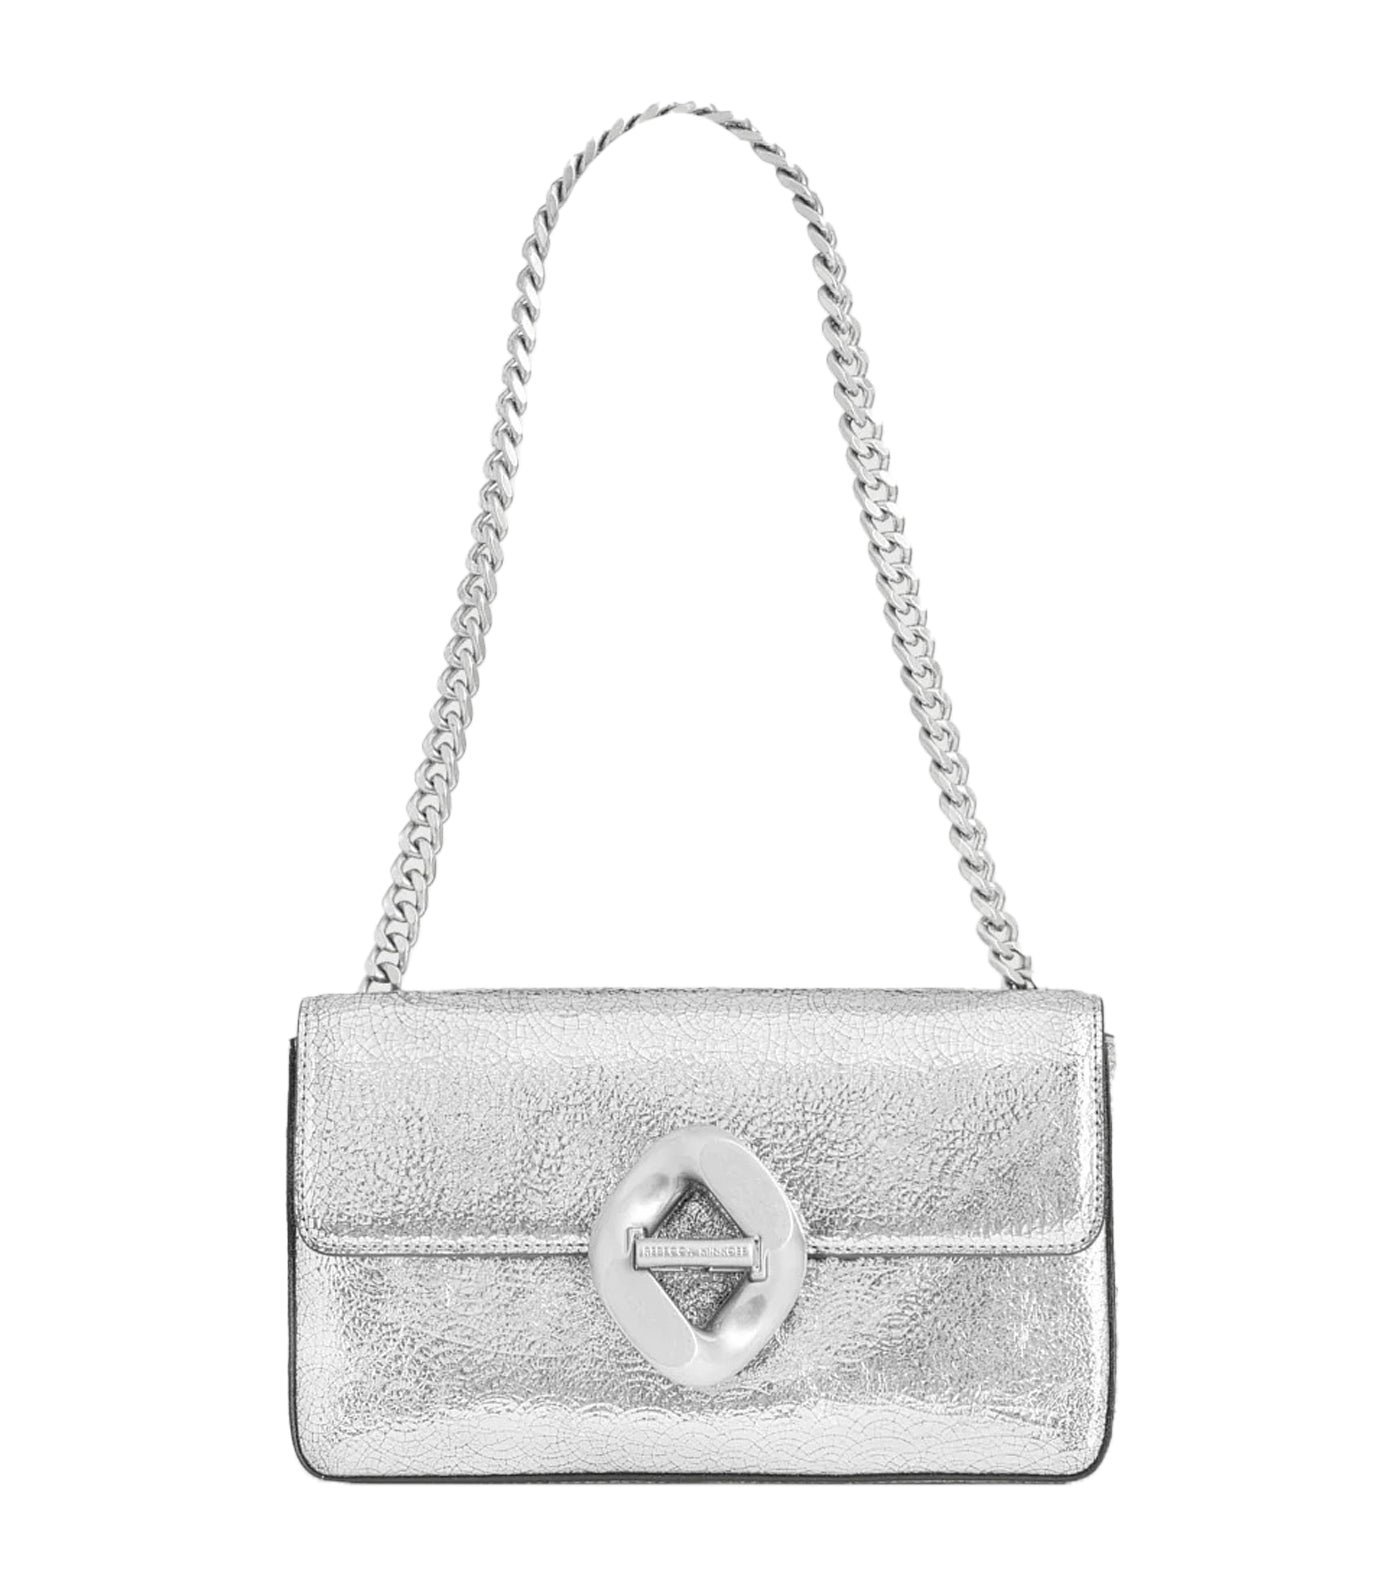 The "G" Small Chain Shoulder Bag Silver